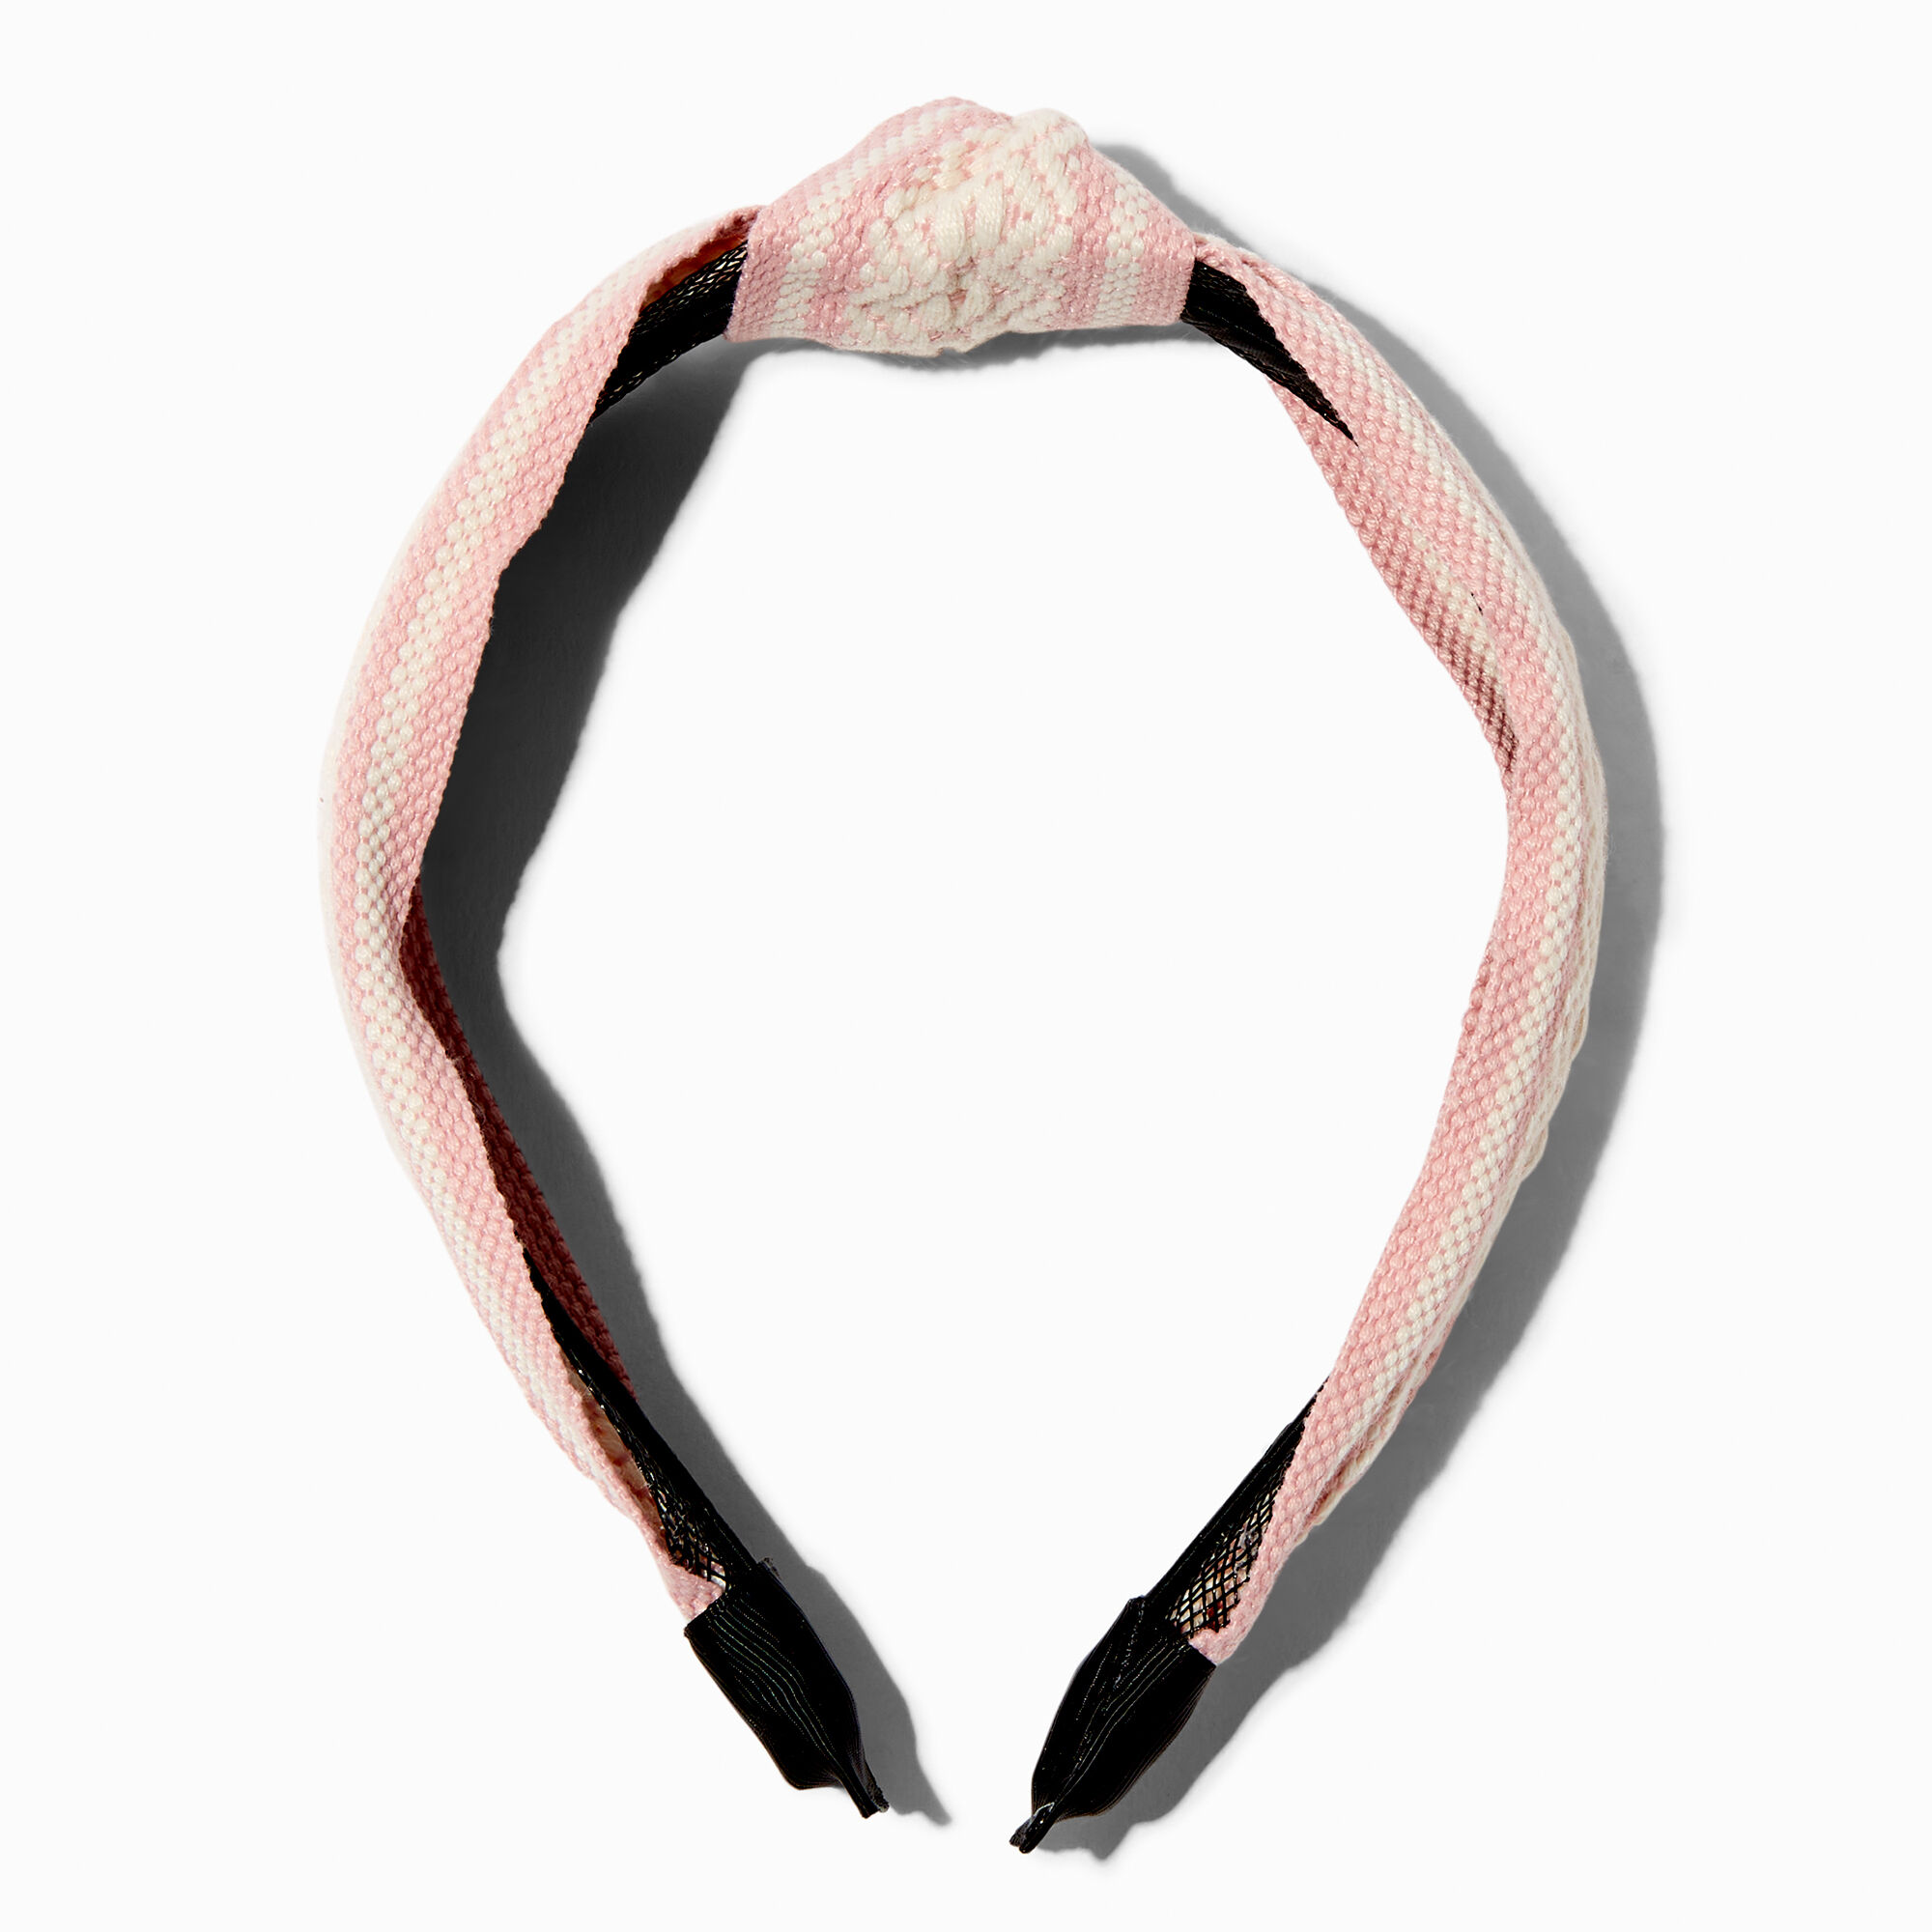 View Claires Blush Woven Tribal Headband Pink information